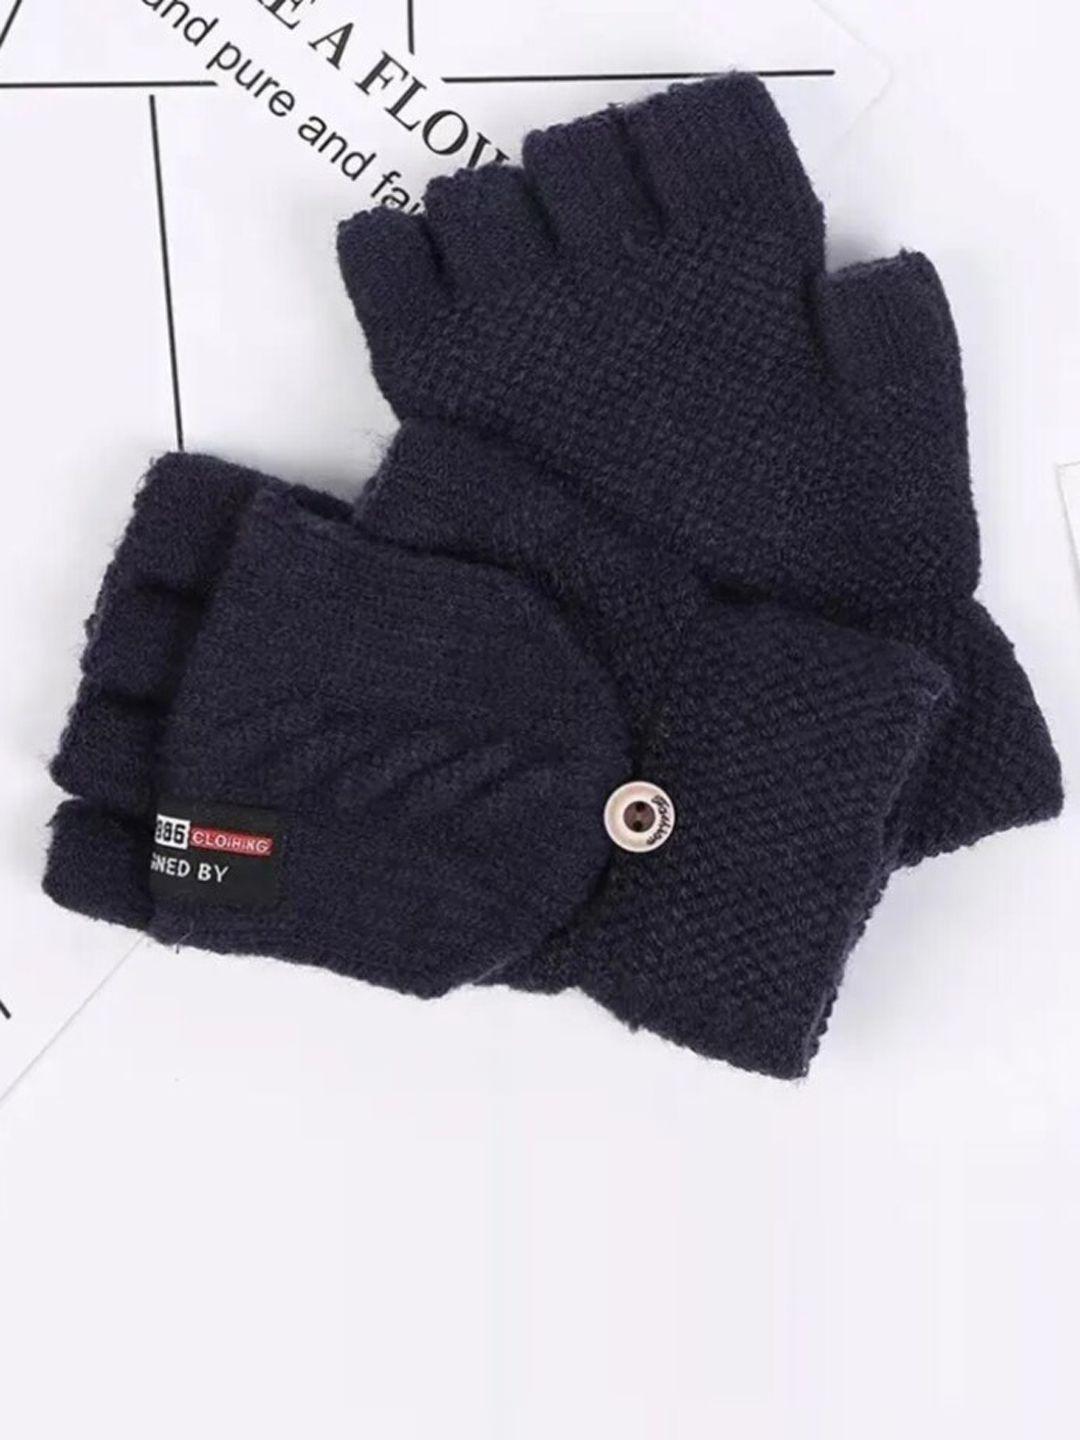 tipy-tipy-tap-girls-half-finger-woolen-winter-gloves-with-attached-hood